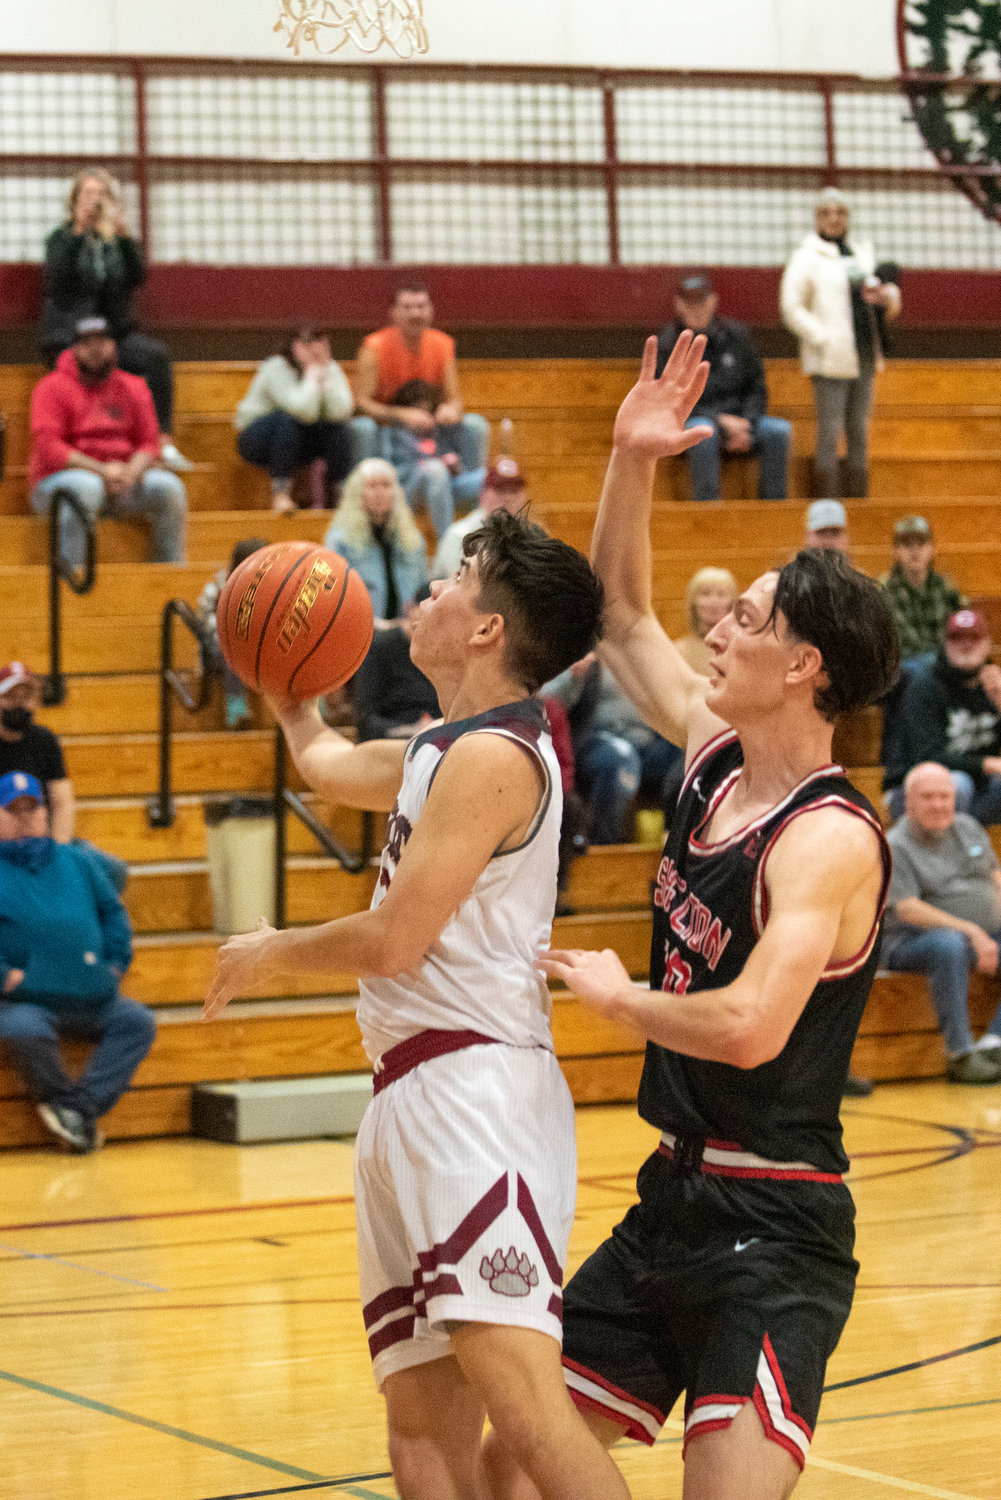 W.F. West's Cameron Amoroso throws up a reverse layin against Shelton on Dec. 8.